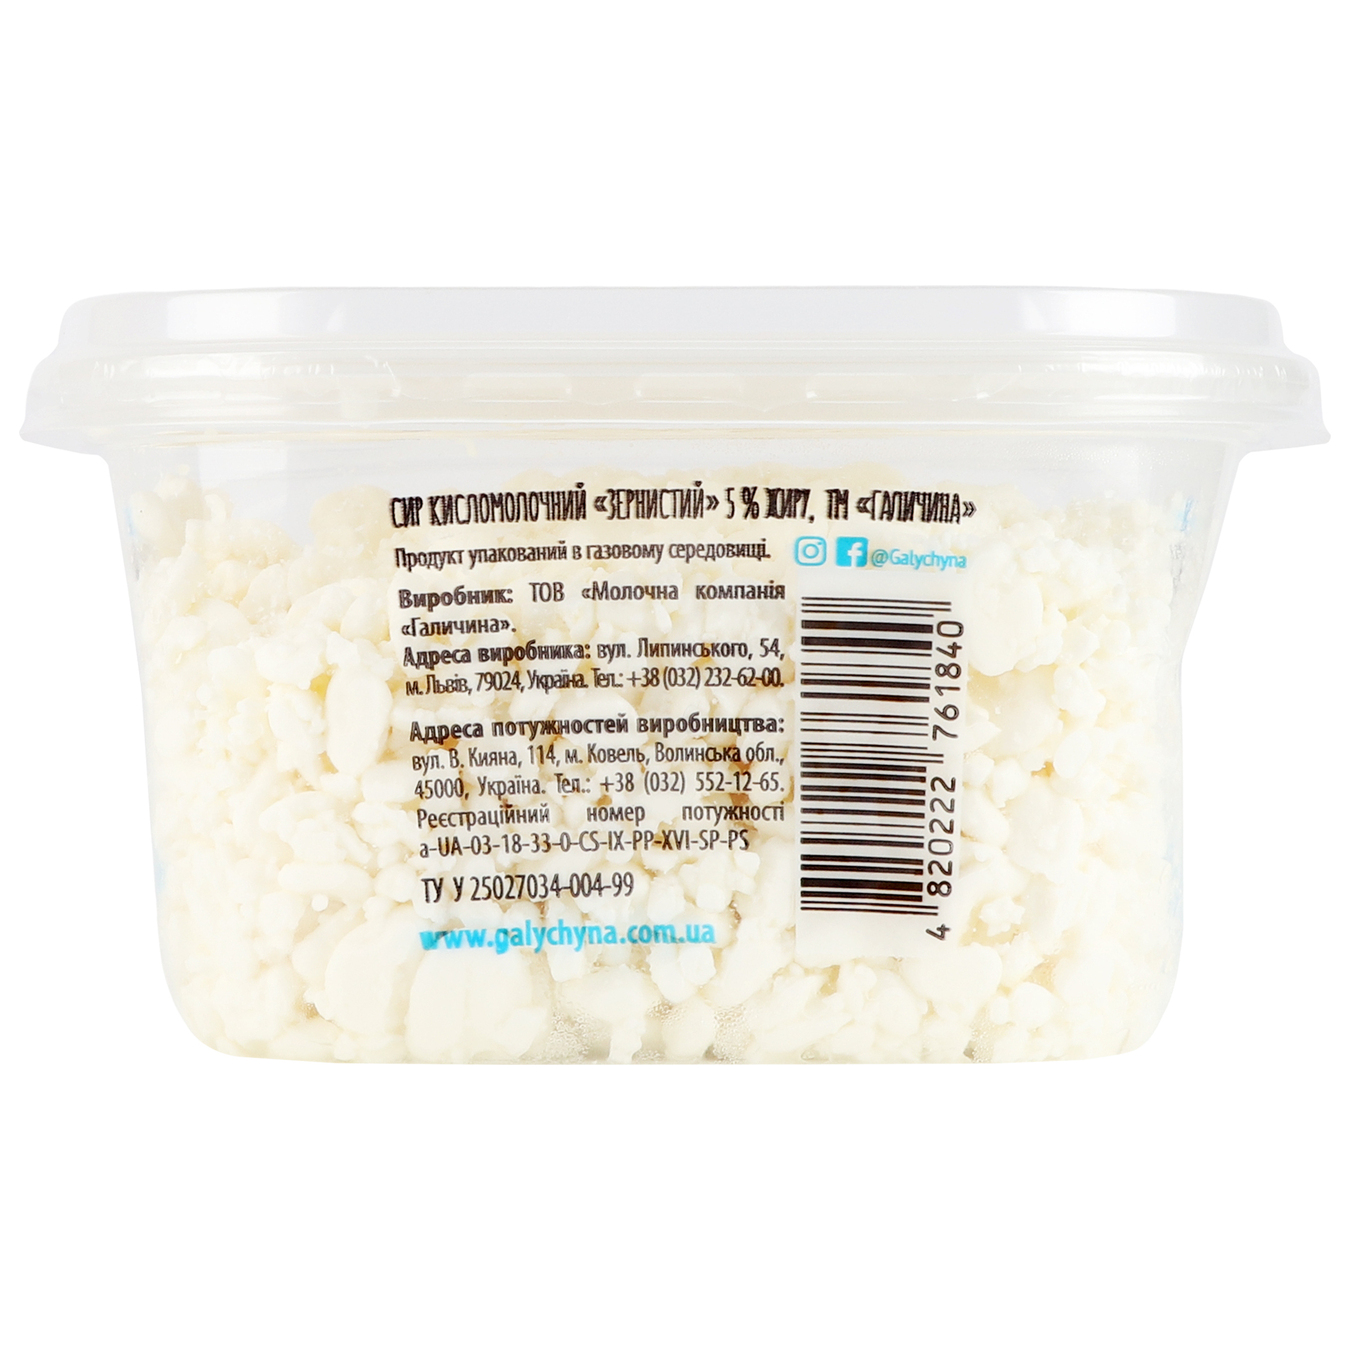 Halychyna cottage cheese in a tray 5% 300g 3